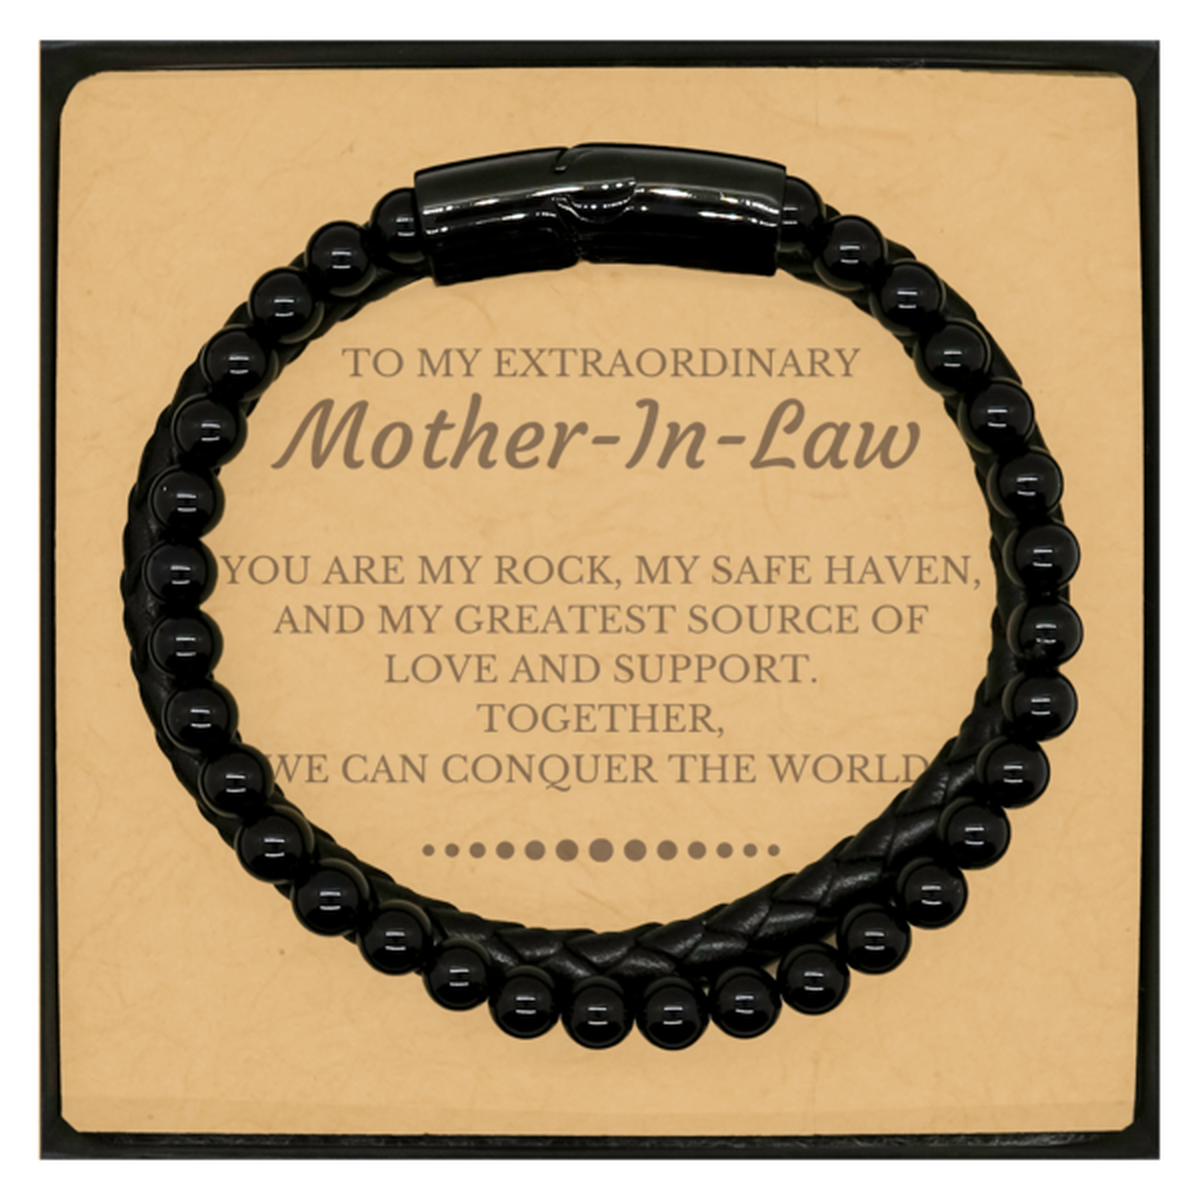 To My Extraordinary Mother-In-Law Gifts, Together, we can conquer the world, Birthday Christmas Stone Leather Bracelets For Mother-In-Law, Christmas Gifts For Mother-In-Law